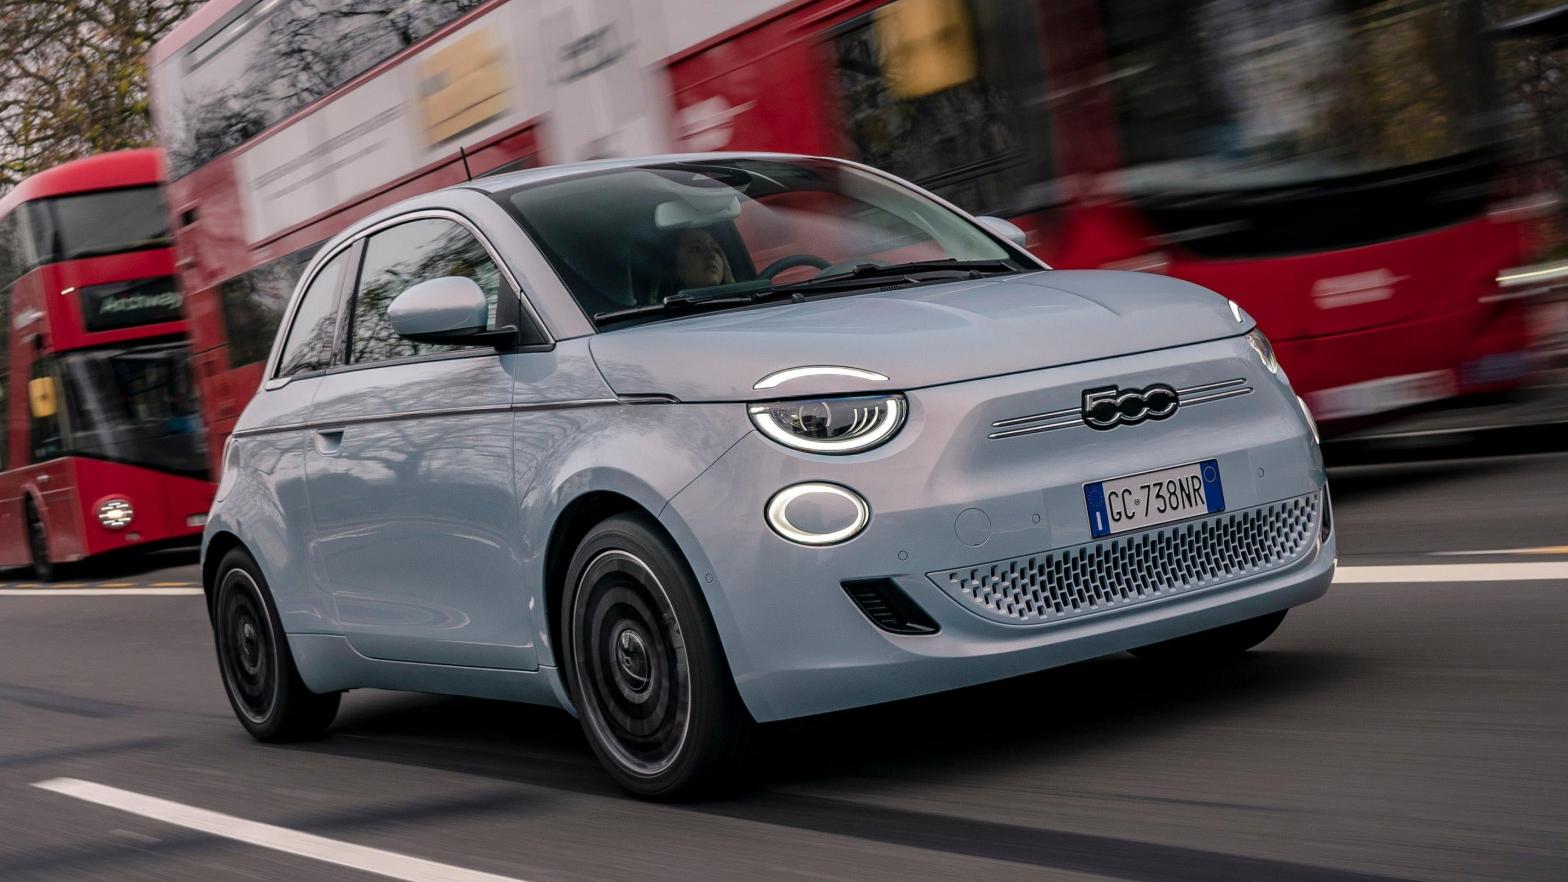 Fiat’s Daring Plan for Its New EV: Don’t Lose $US14,000 on Every Car Sold